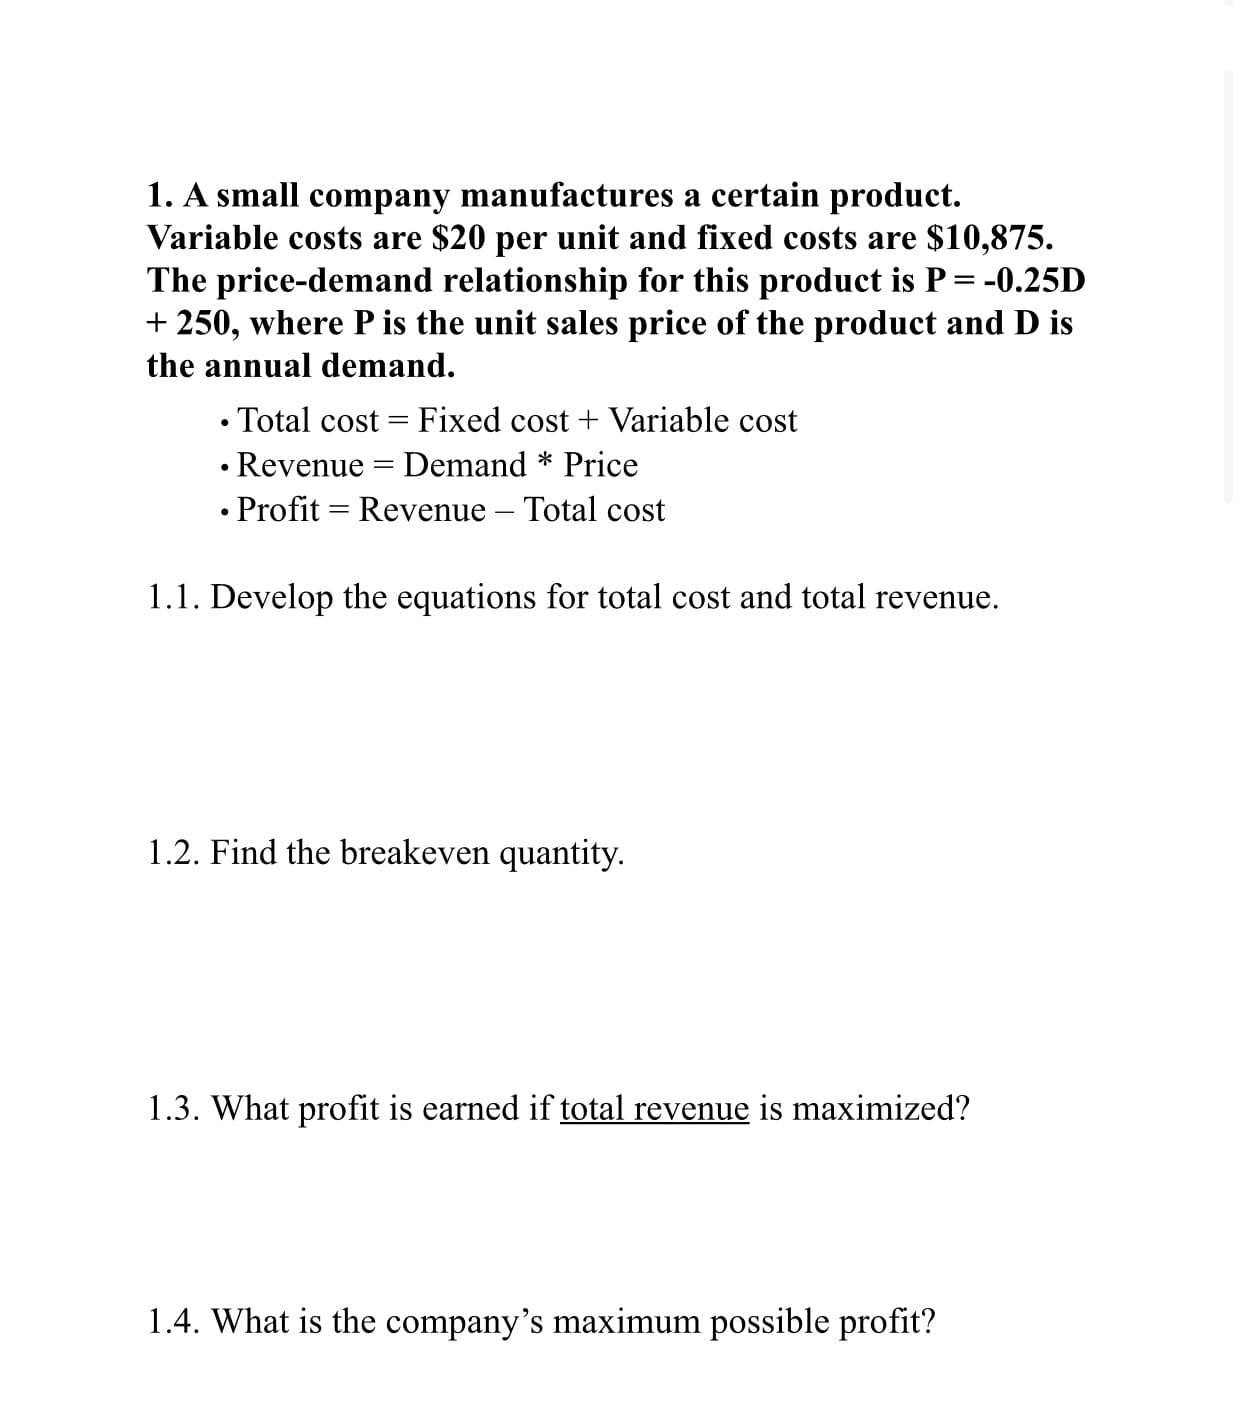 1. A small company manufactures a certain product.
Variable costs are $20 per unit and fixed costs are $10,875.
The price-demand relationship for this product is P= -0.25D
+ 250, where P is the unit sales price of the product and D is
the annual demand.
• Total cost = Fixed cost + Variable cost
• Revenue = Demand * Price
• Profit = Revenue – Total cost
1.1. Develop the equations for total cost and total revenue.
1.2. Find the breakeven quantity.
